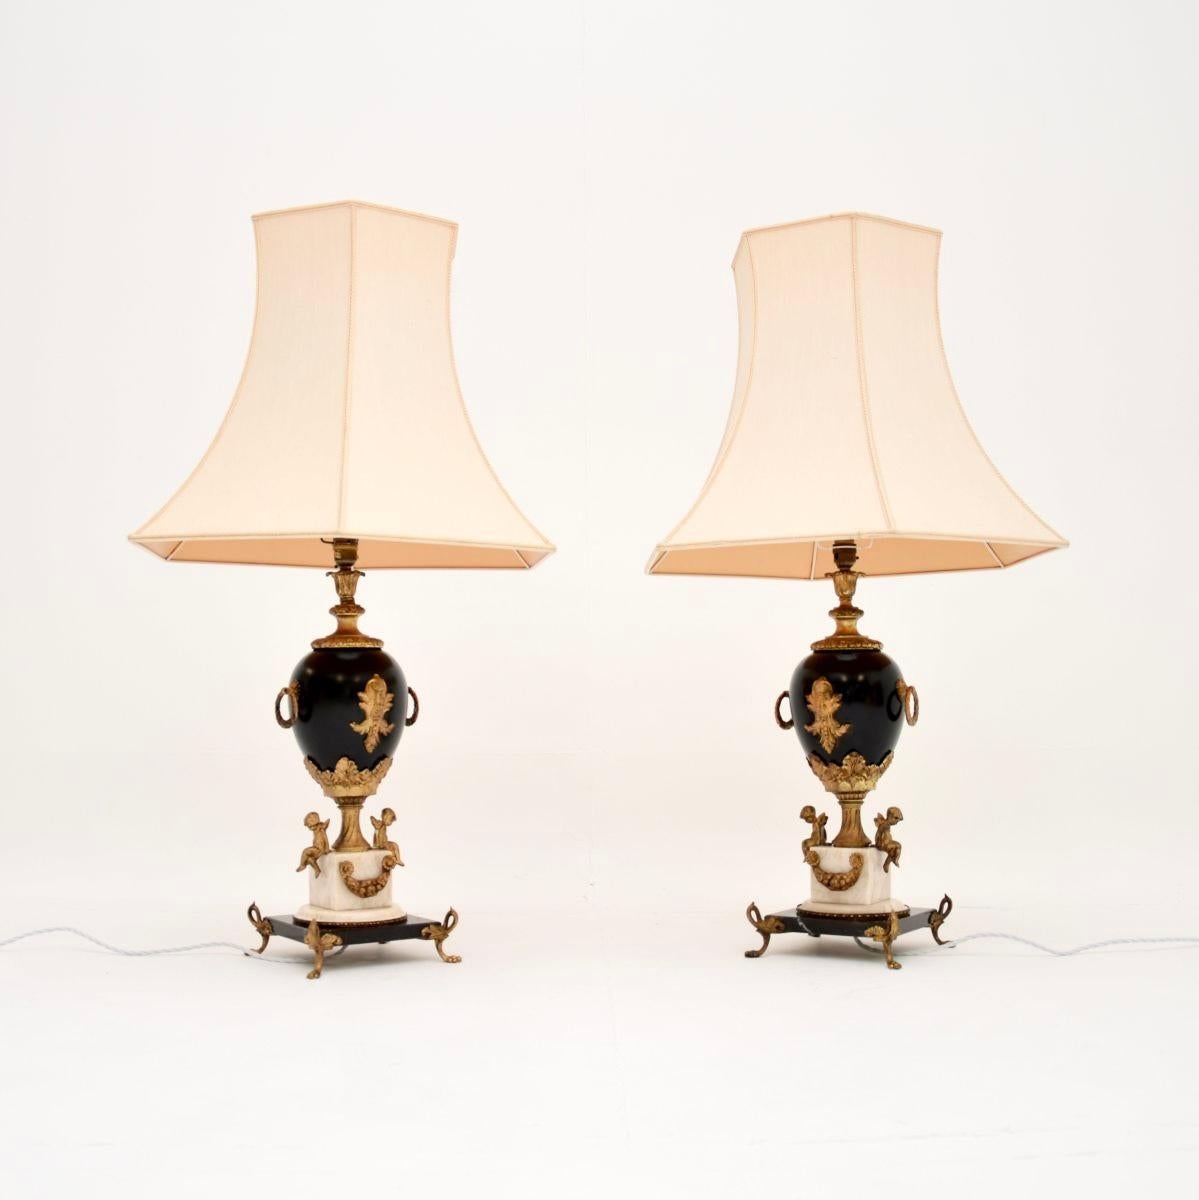 An impressive and large pair of antique French marble table lamps, dating from around the 1930’s.

They are a great size and are beautifully designed, the quality is fantastic. They stand on marble bases with gorgeous gilt metal mounts, the central